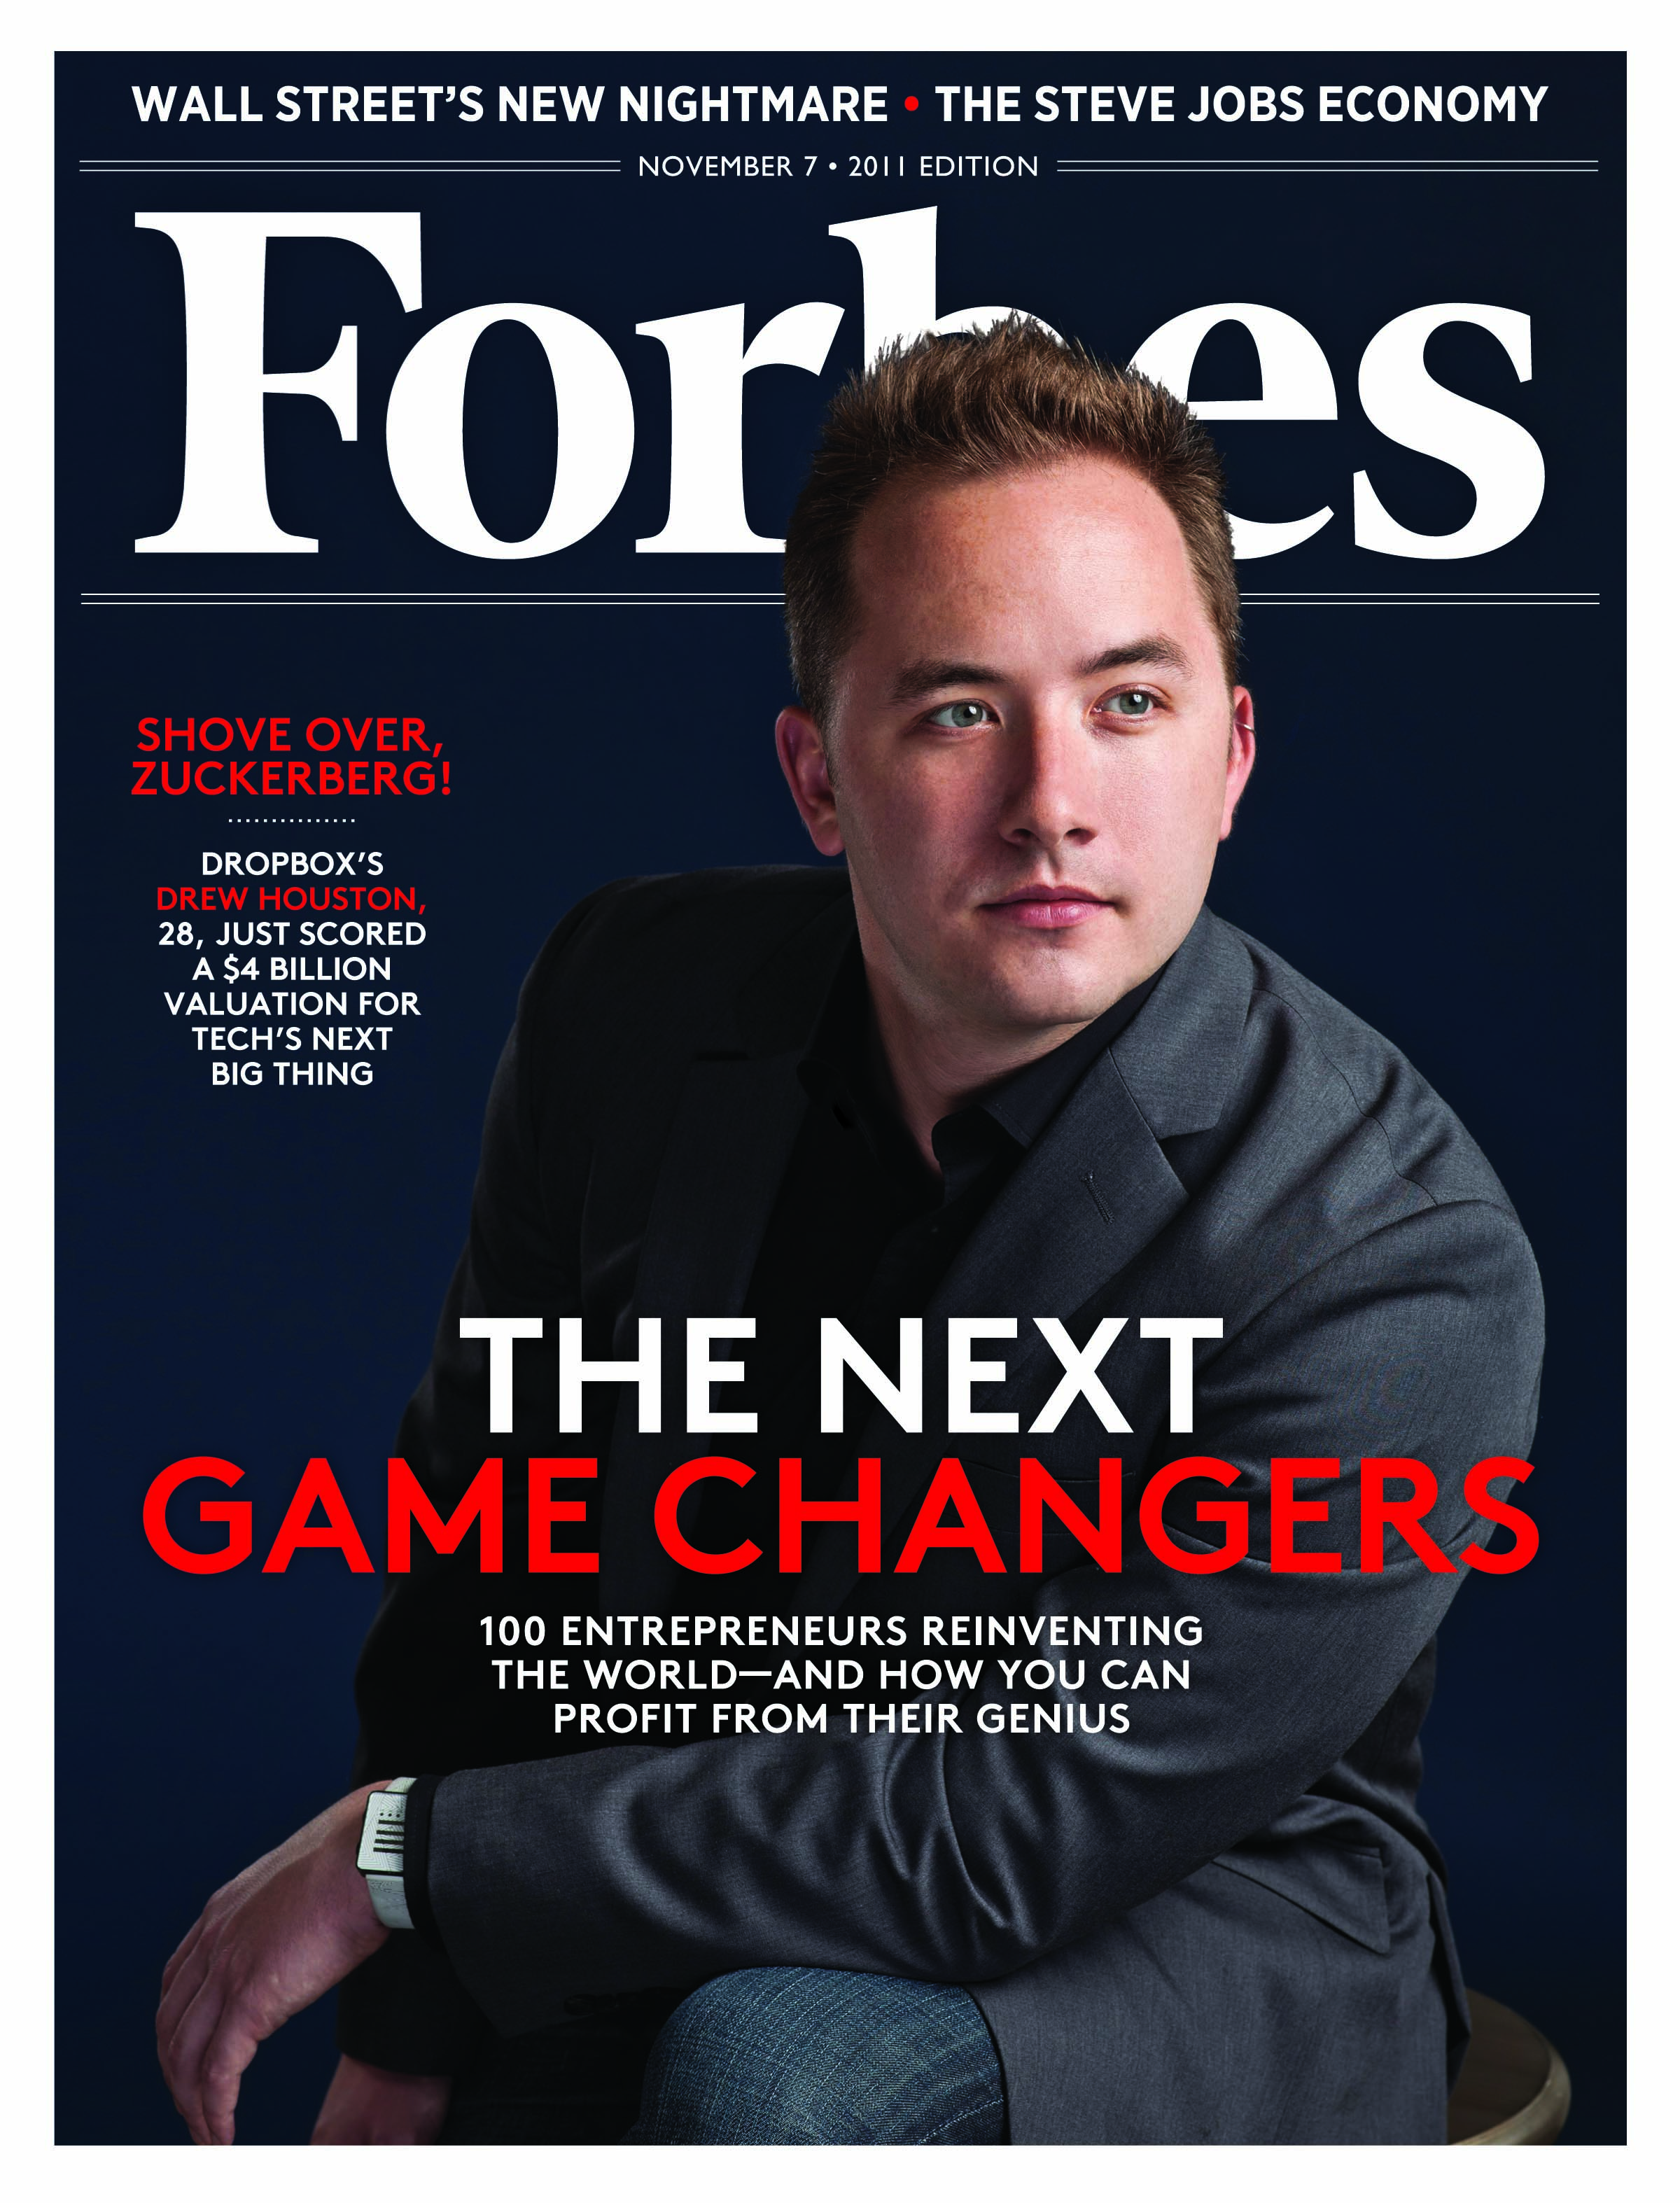 Dropbox Funding, API and Forbes